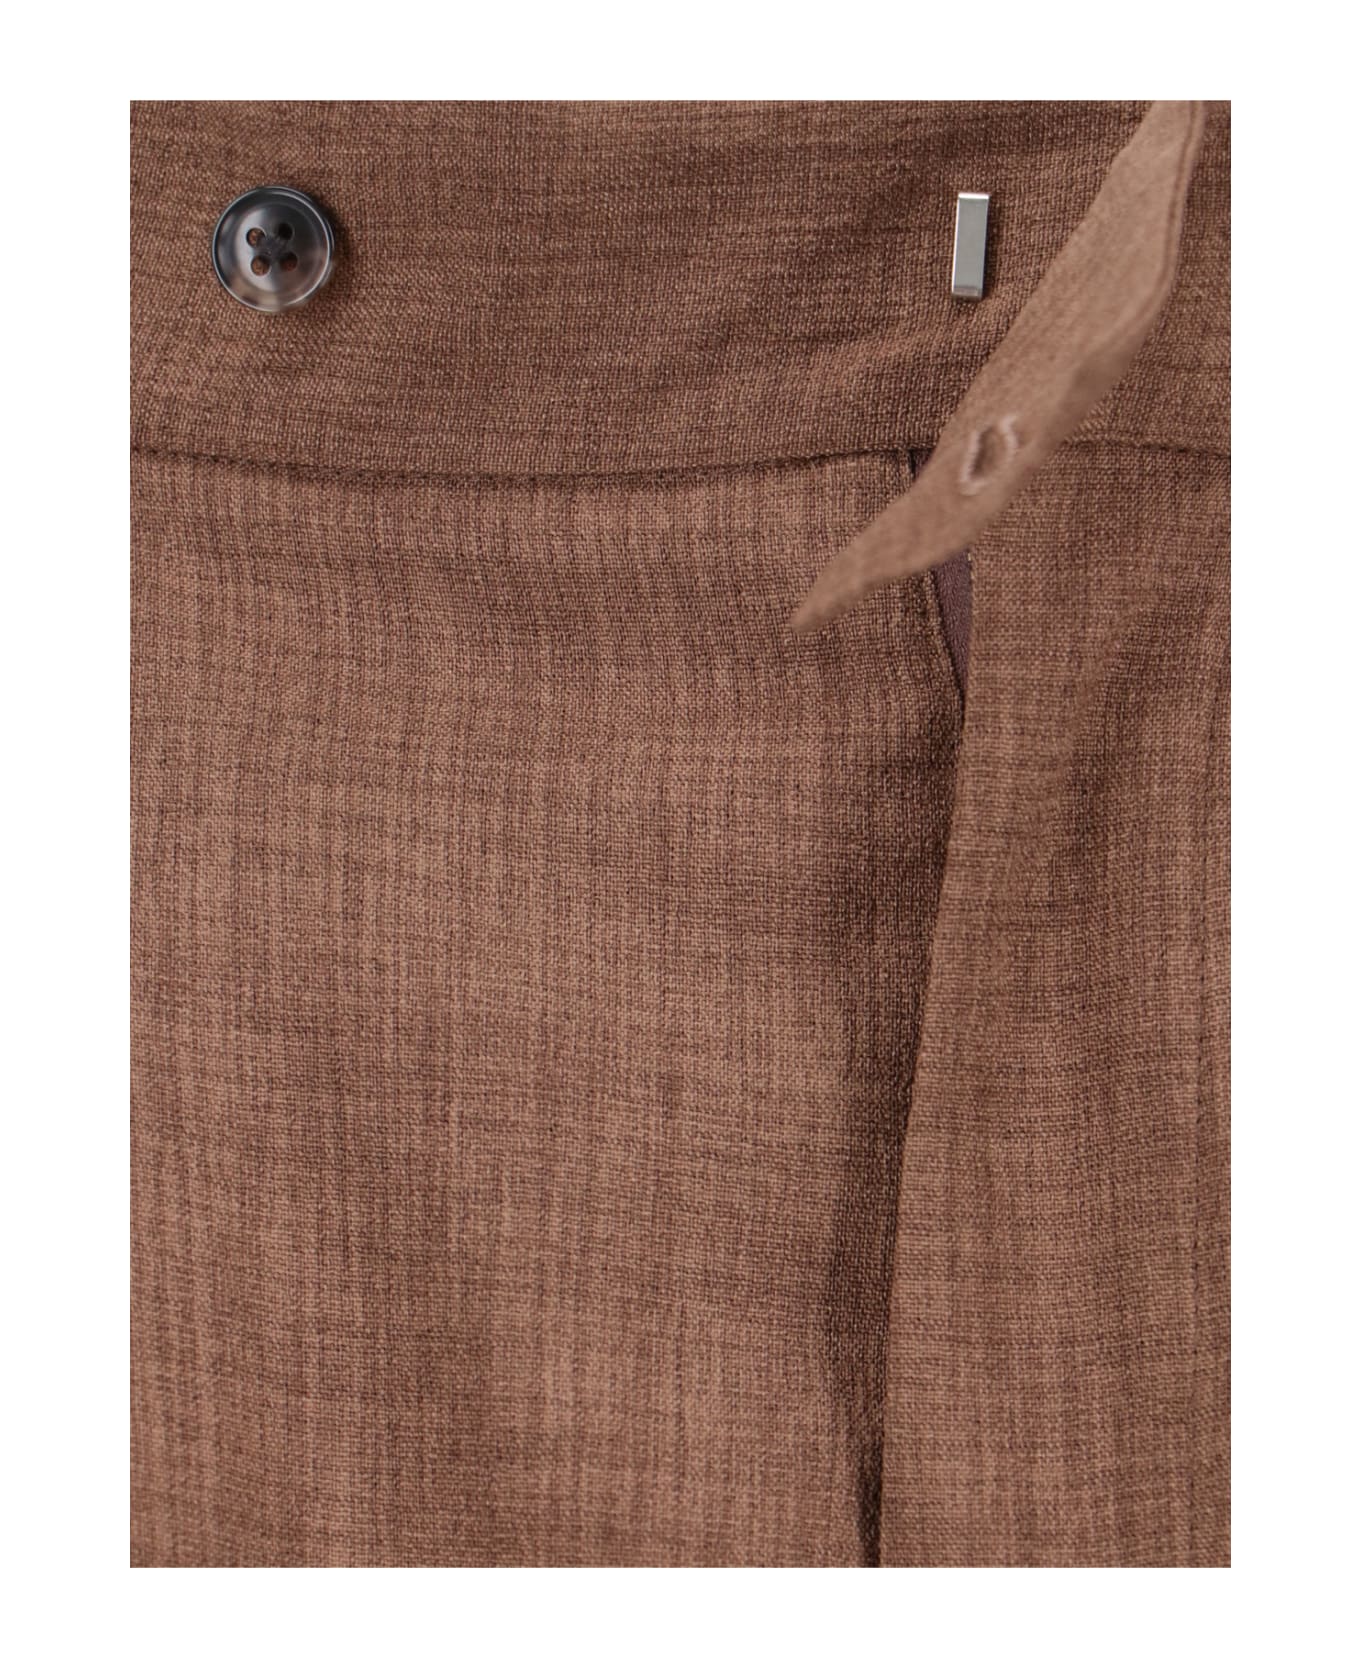 Needles Wide Tailored Trousers - Brown ボトムス